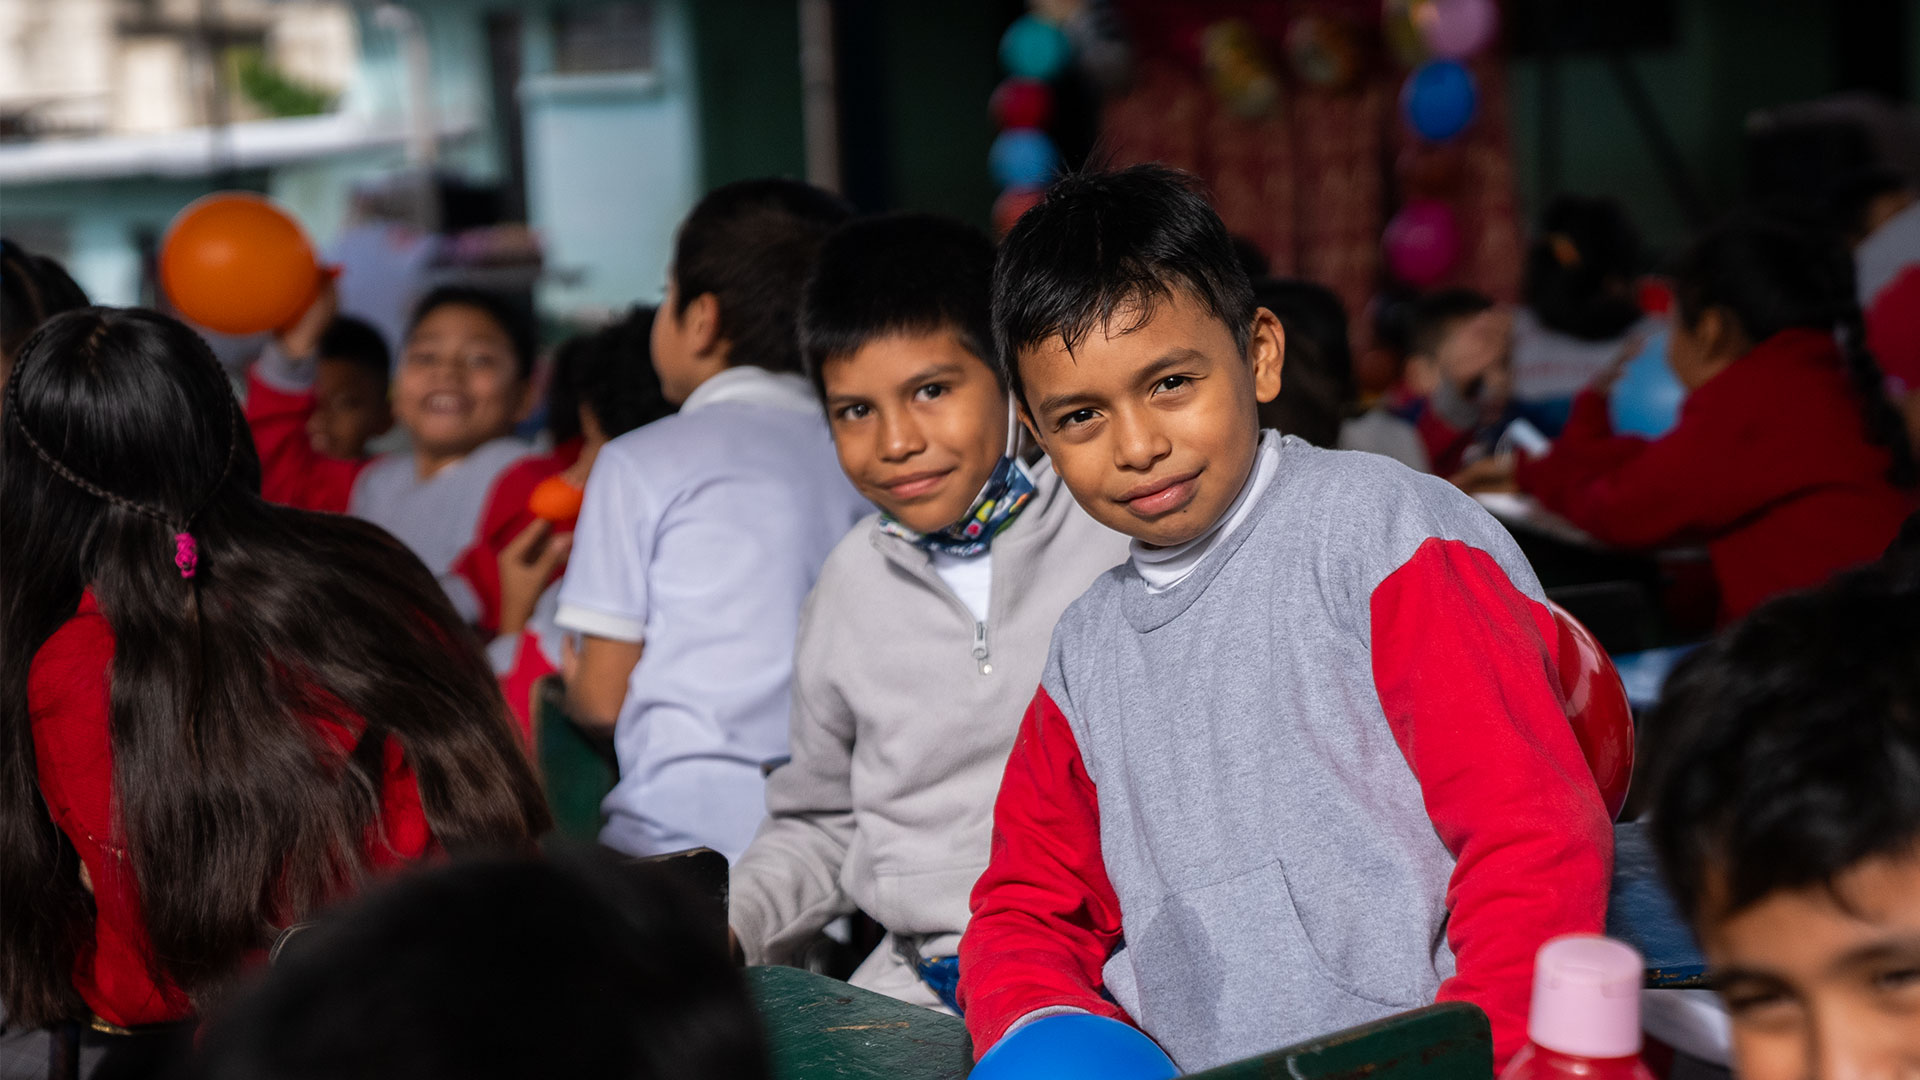 The journalist Catherine Pepinster went to Guatemala to see the impact of your support for Bible mission as children embrace an alternative to the gang culture around them.